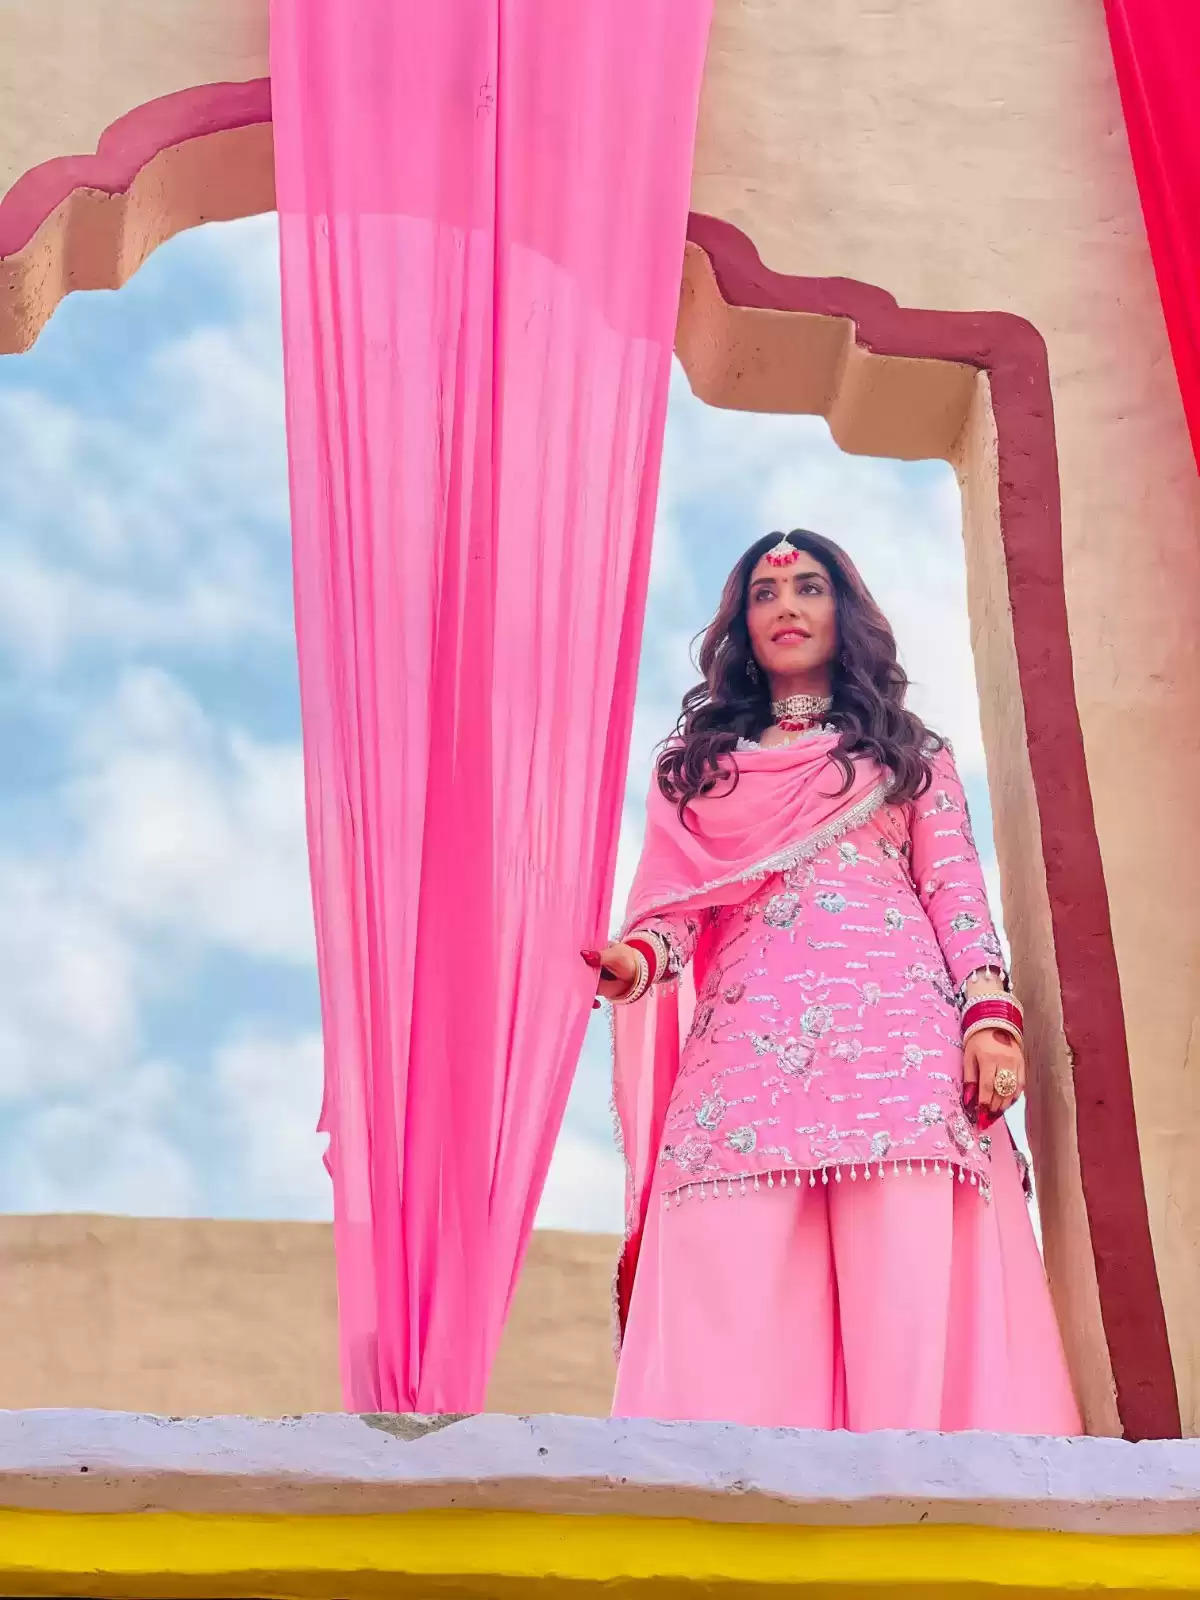 Delbar Arya Shoots For A Wedding Song In A Perfect Punjabi Kudi Look For Her Movie "Damdaa" Alongside Satvinder Singh- Check BTS pictures now